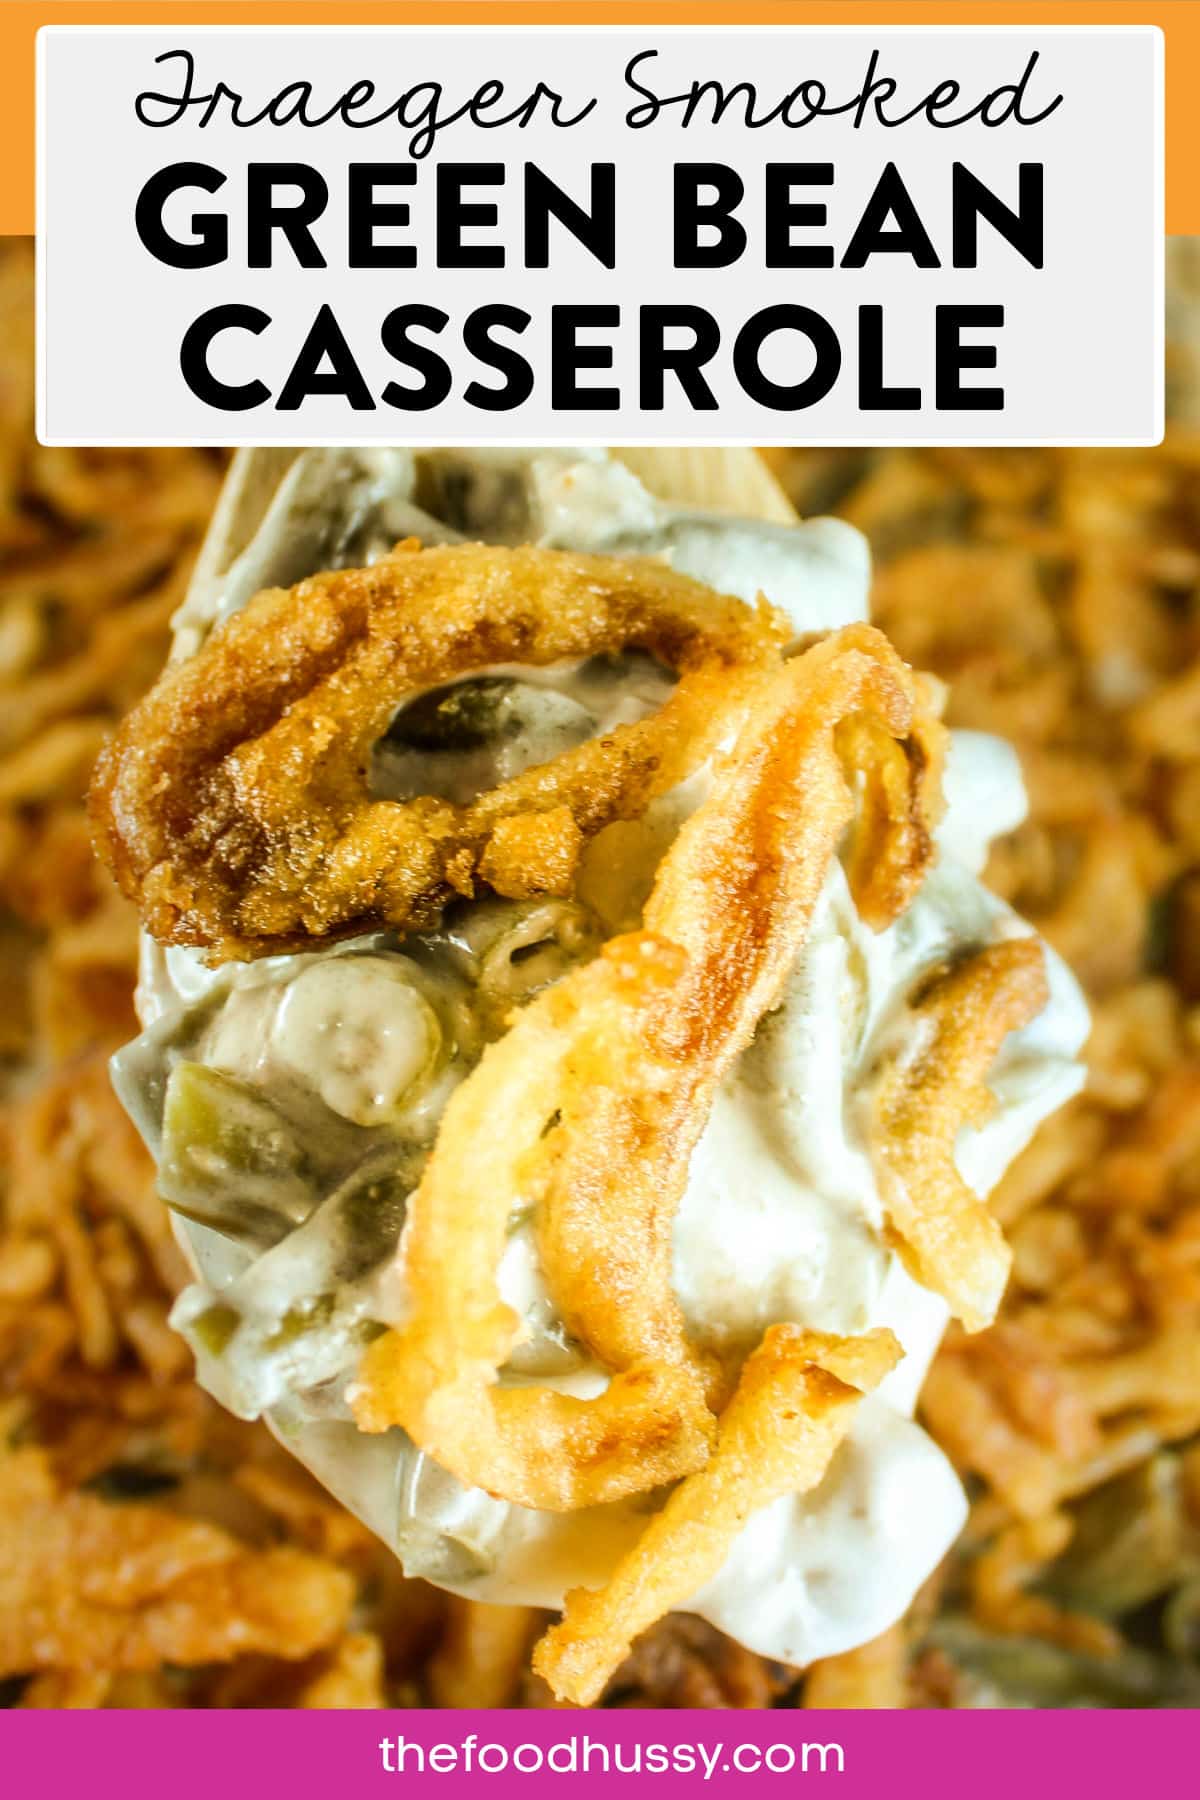 Smoked Green Bean Casserole takes a family favorite holiday casserole and makes it even more delicious with a slight smoky flavor! This will definitely be the dish everybody eats first! via @foodhussy